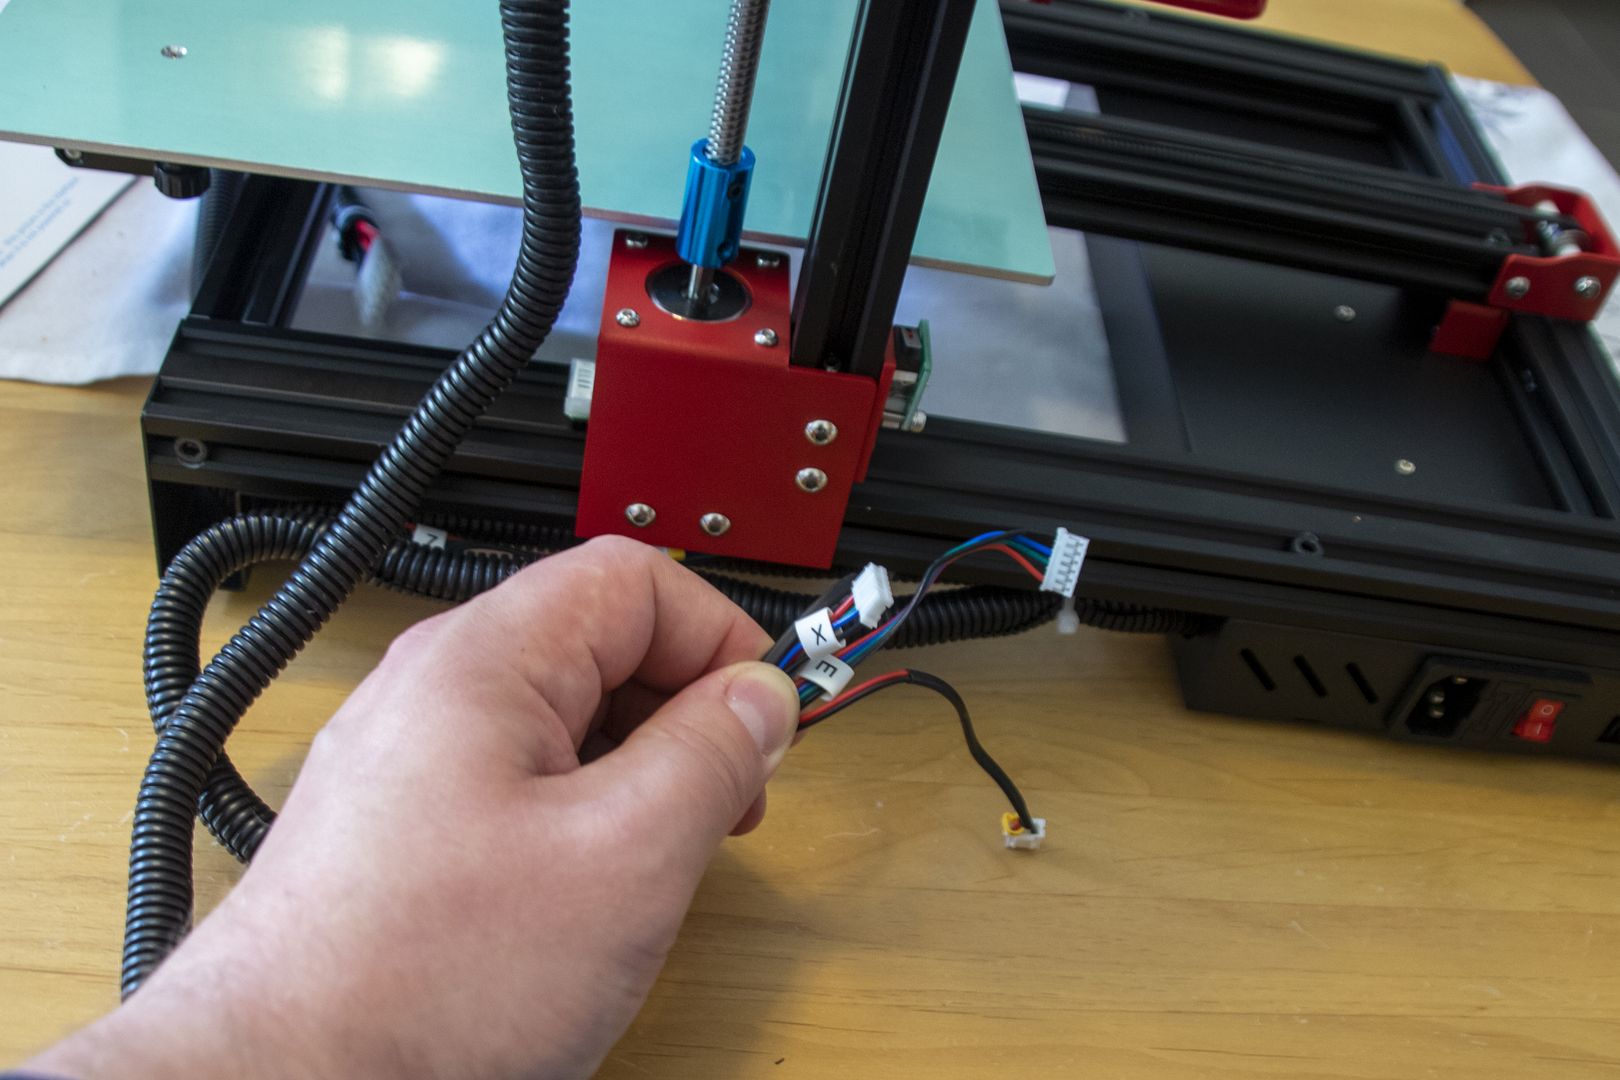 Cable for X-axis and extruder